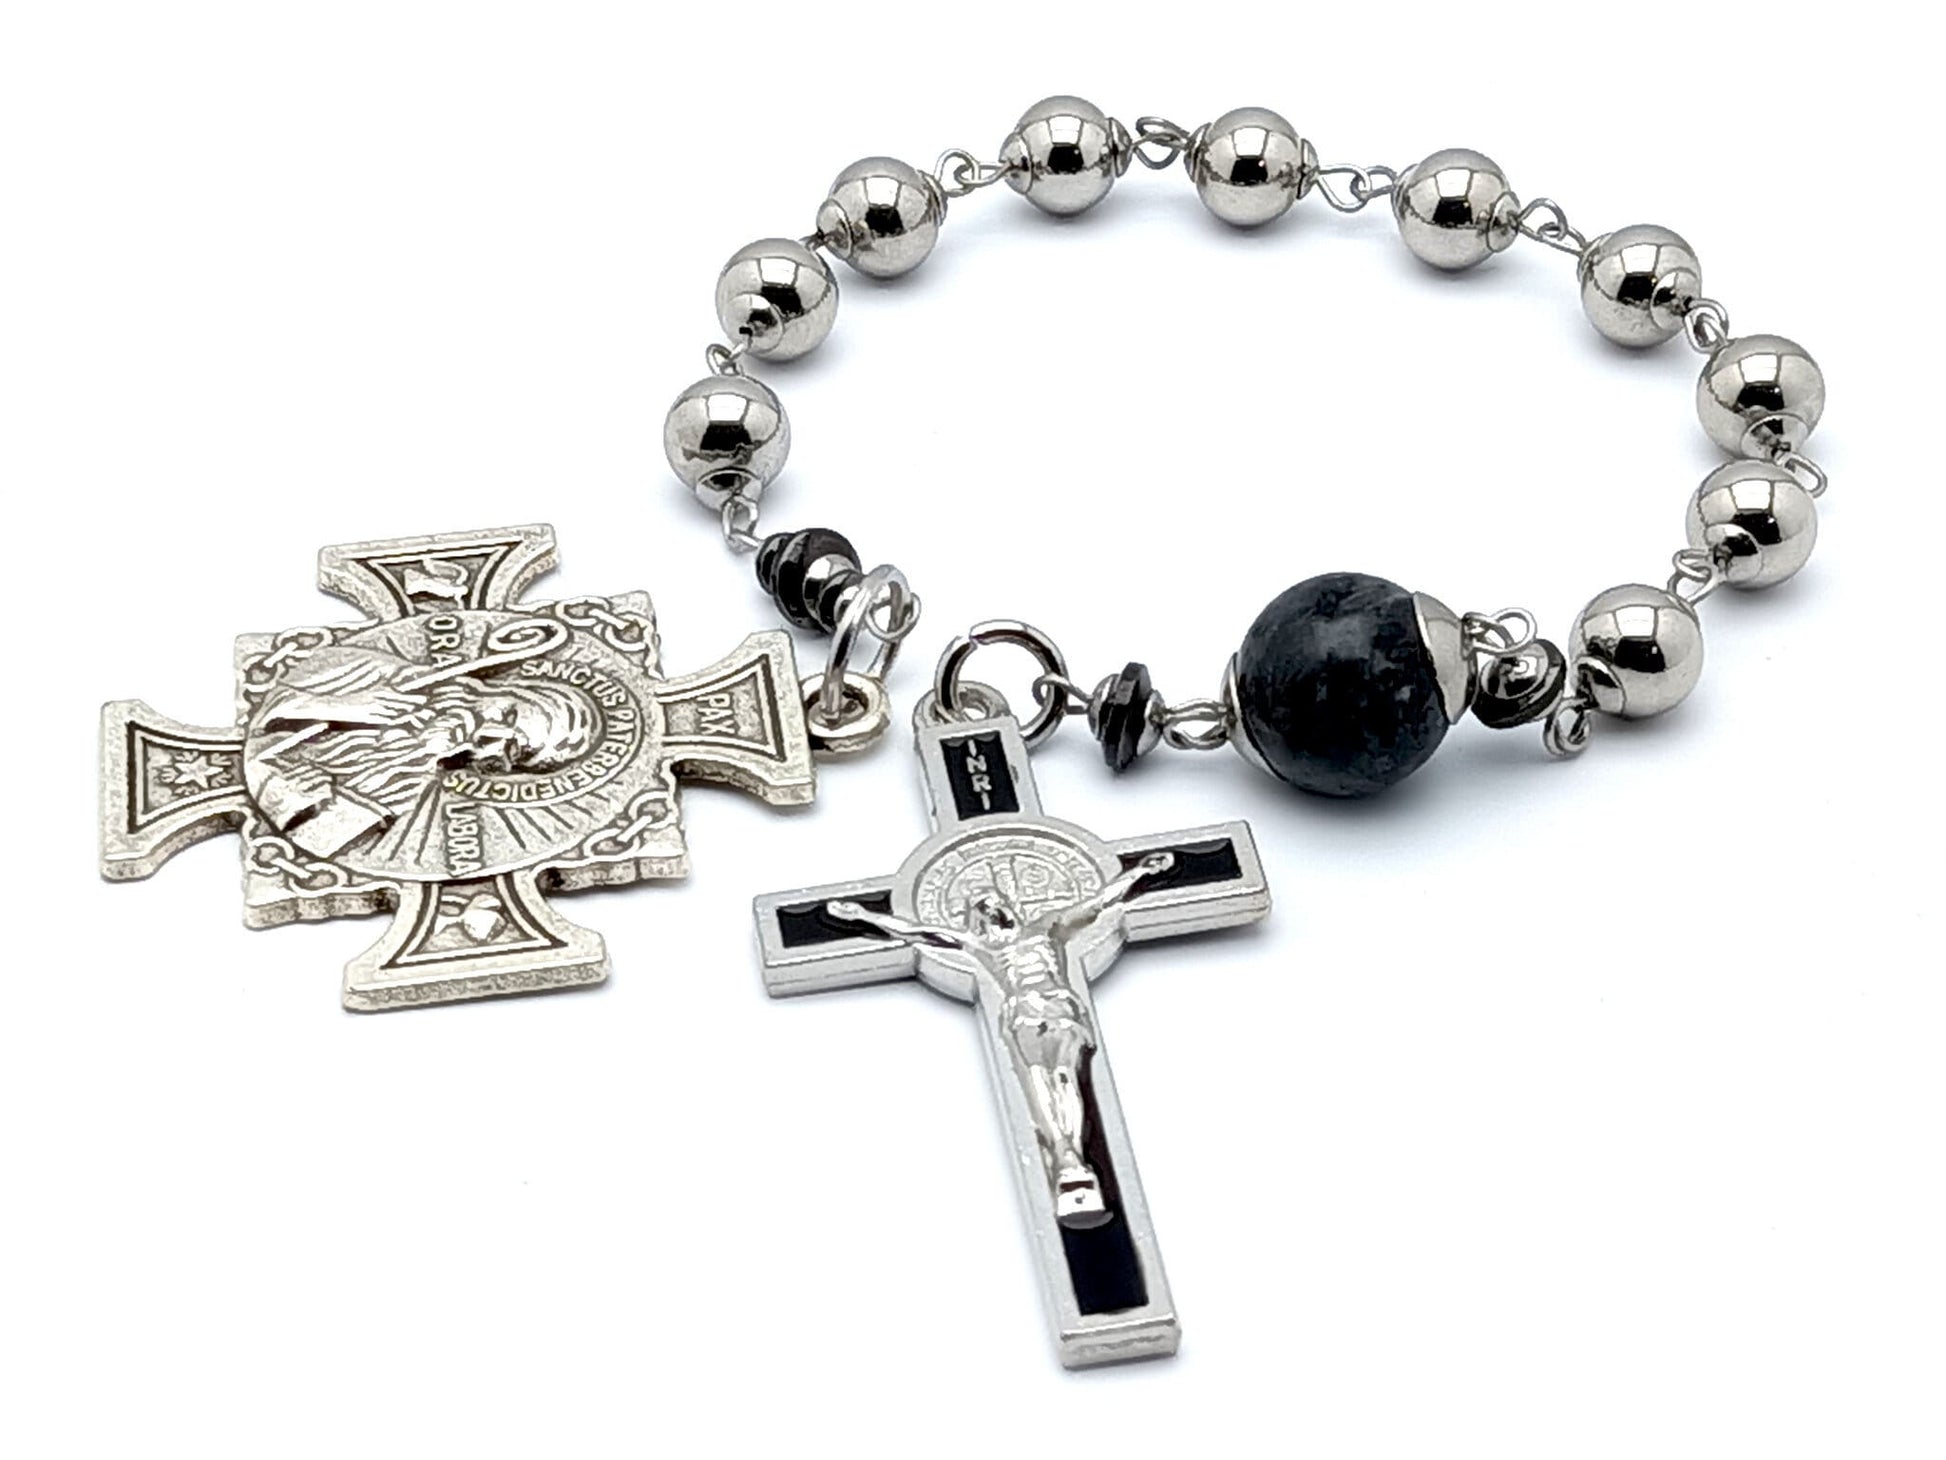 Saint Benedict unique rosary beads single decade rosary with stainless steel and gemstone beads, black enamel crucifix and silver end medal.